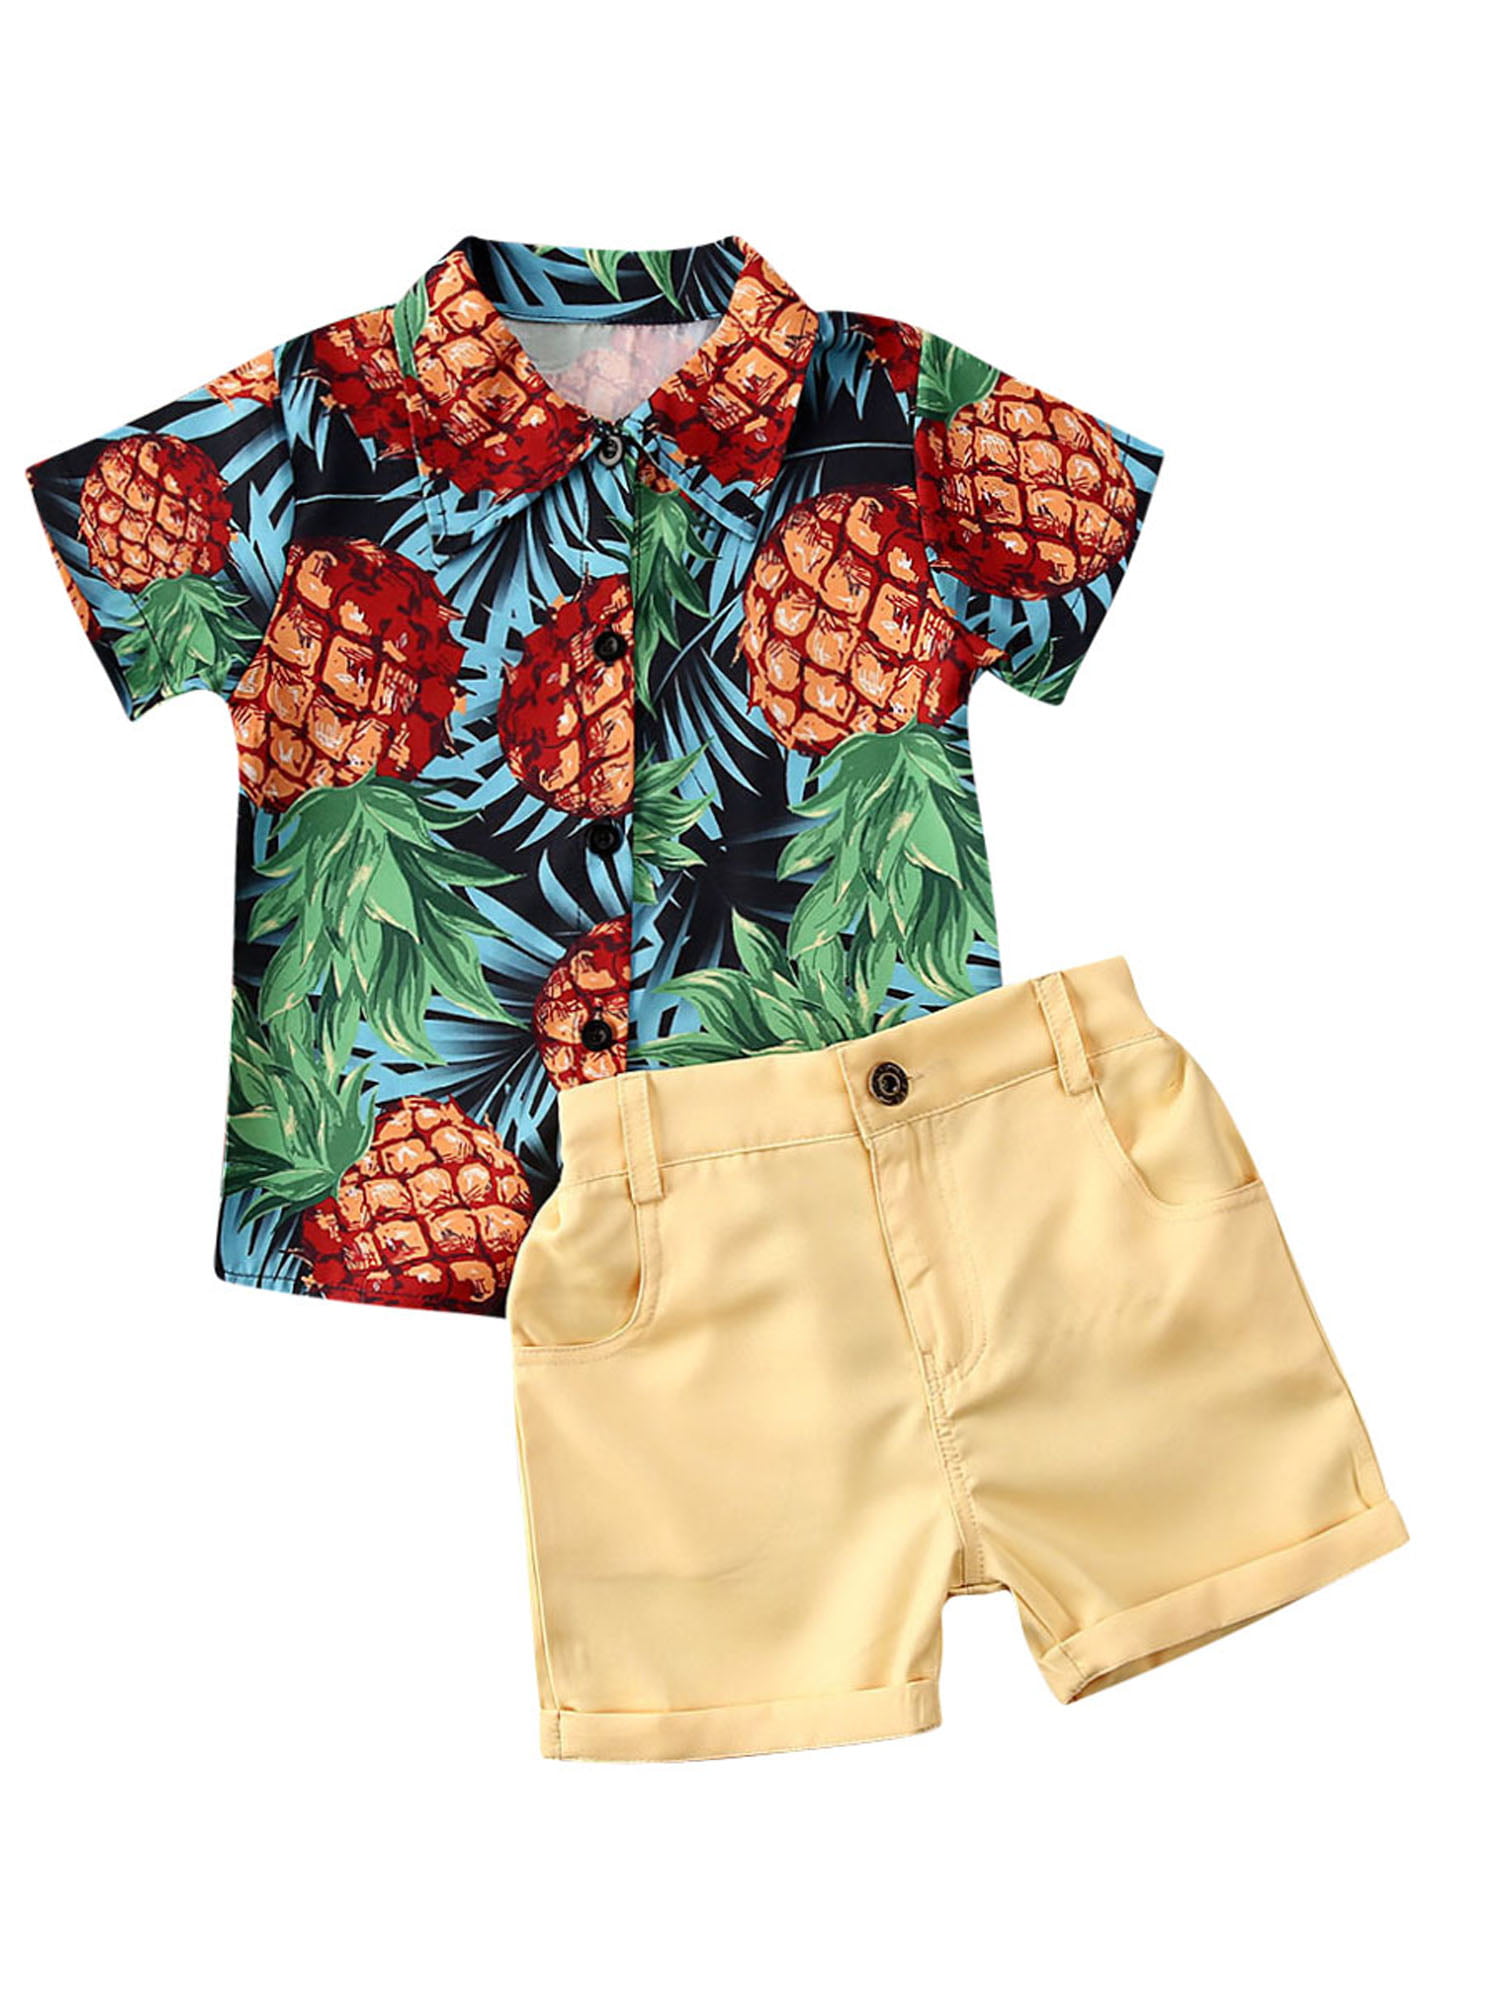 Bmnmsl Bmnmsl 2020 Baby Summer Clothing Kids Baby Boys Clothes Set